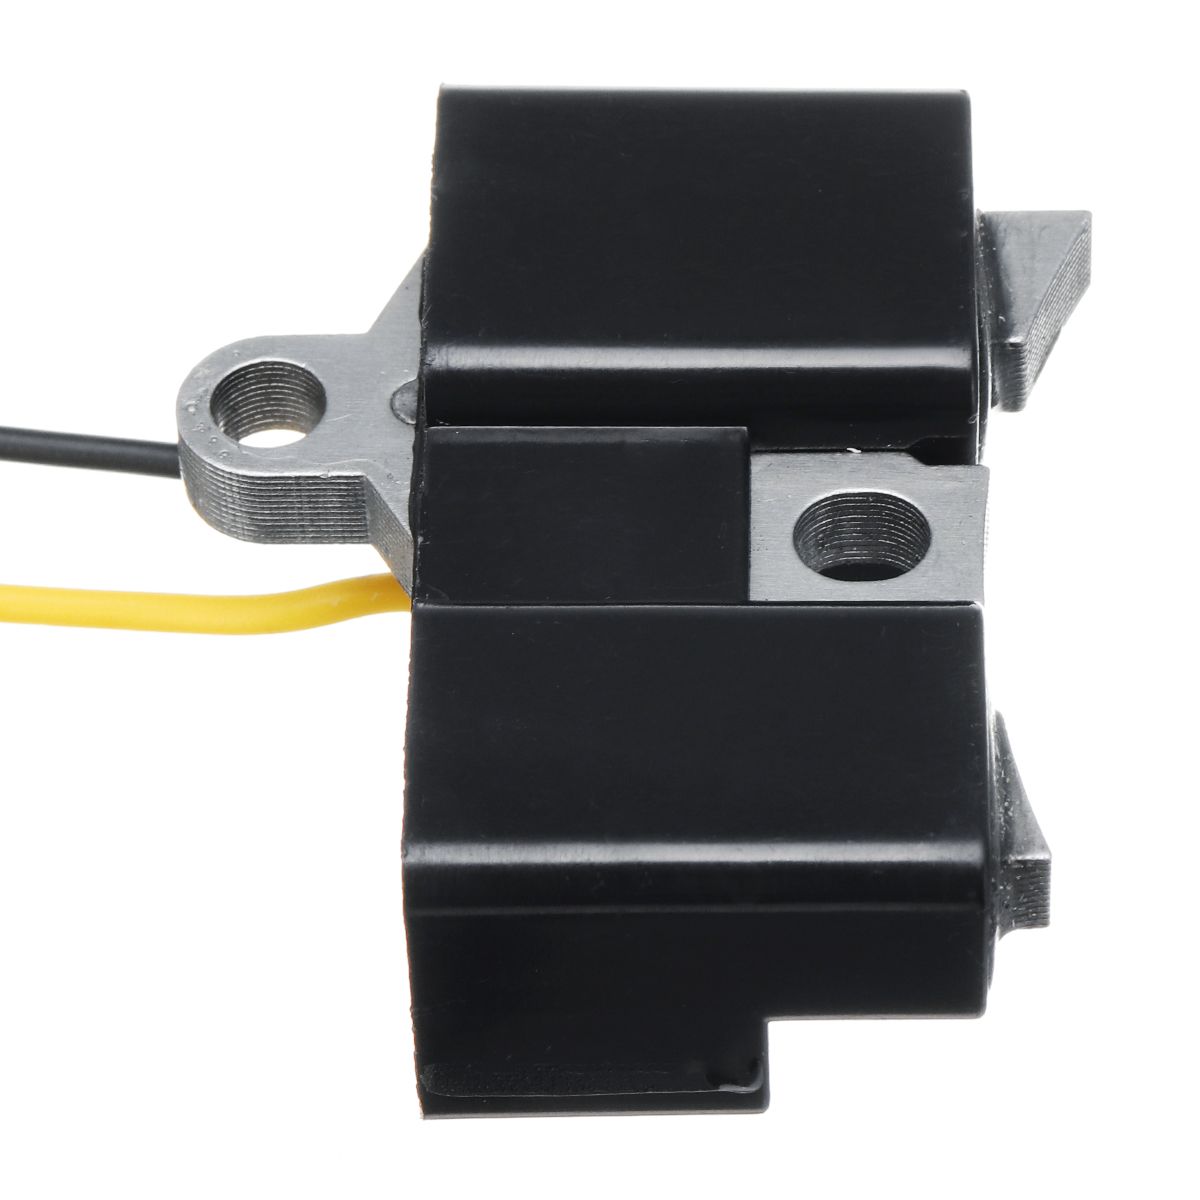 Replacement-Ignition-Coil-Ignition-Module-For-Husqvarna-Chainsaw-61-250-254-268-272-Chainsaw-Parts-A-1412557